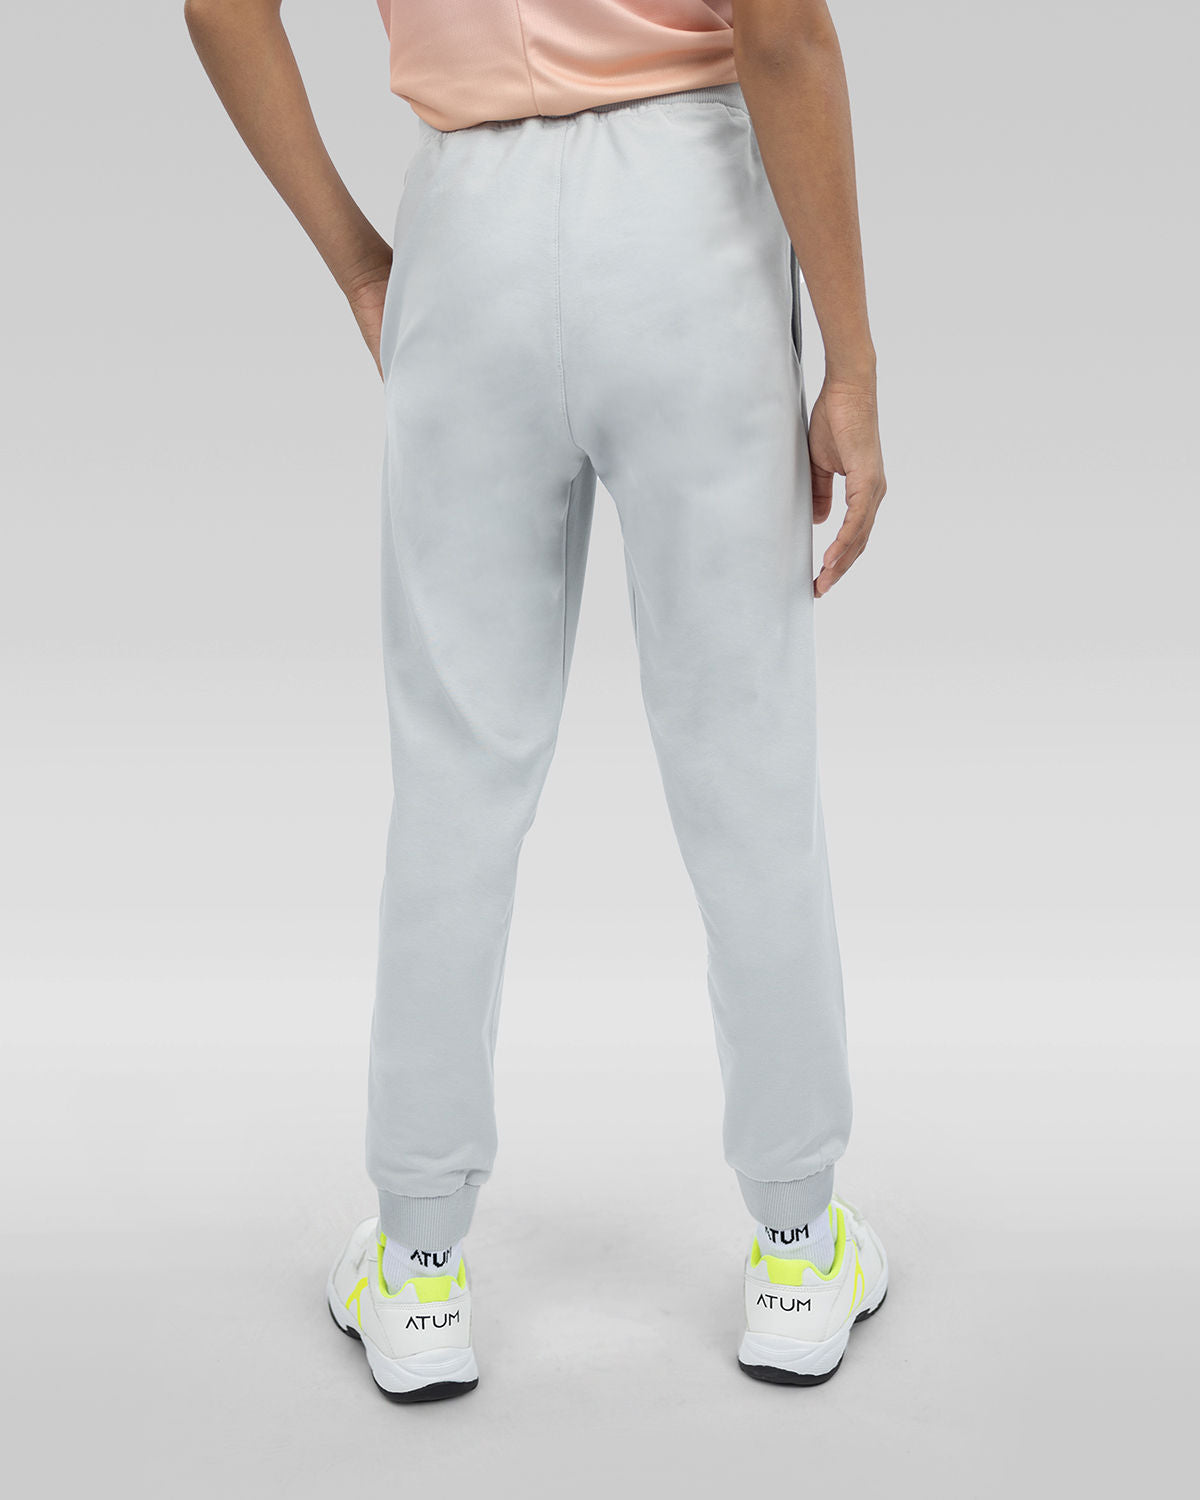 Simple and smooth girls sweatpants